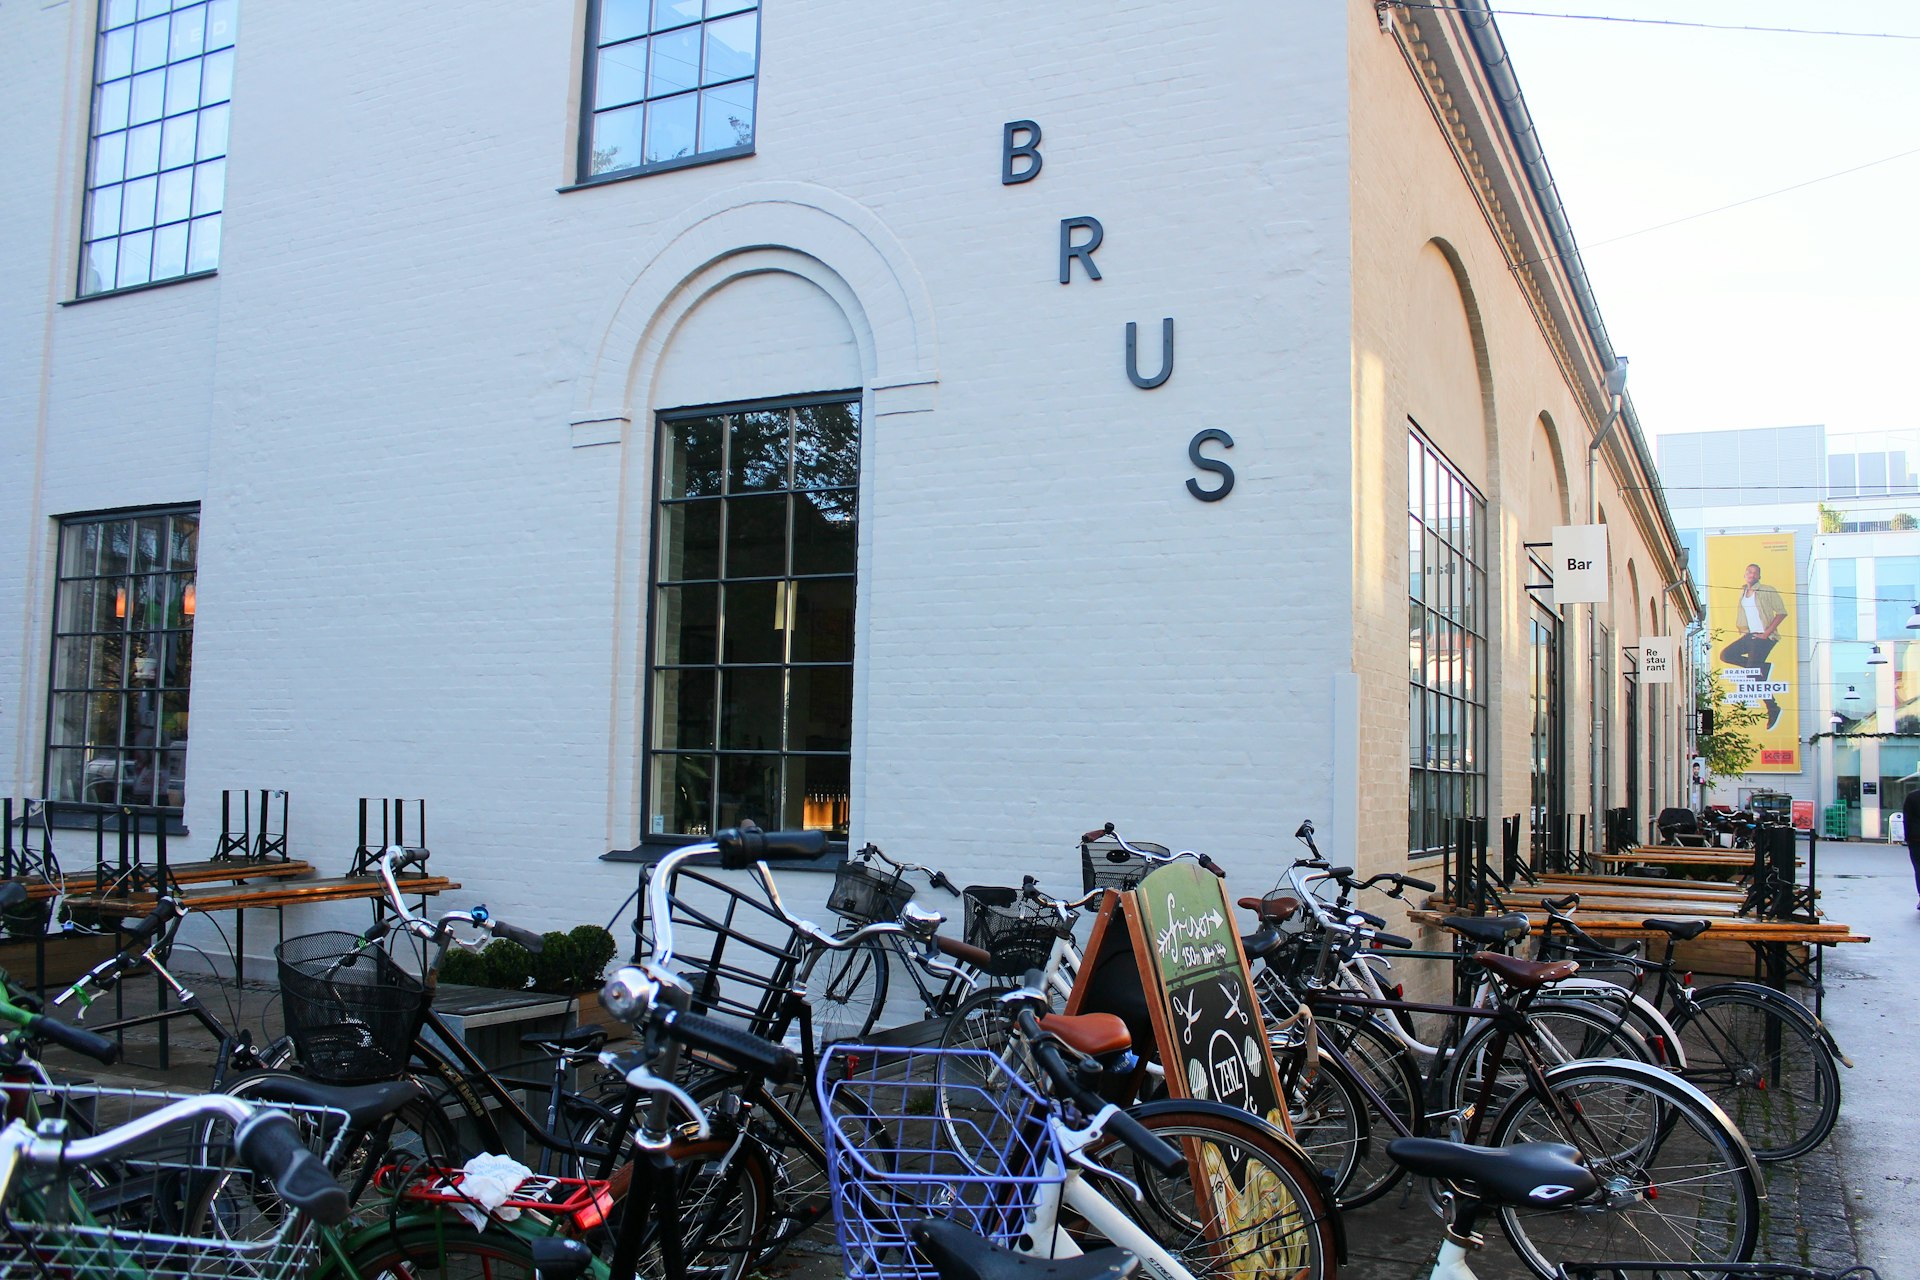 The exterior of Brus microbrewery in Copenhagen; many bikes are parked outside the simple whitewashed building that has 'BRUS' spelled out in individual letters on the side.